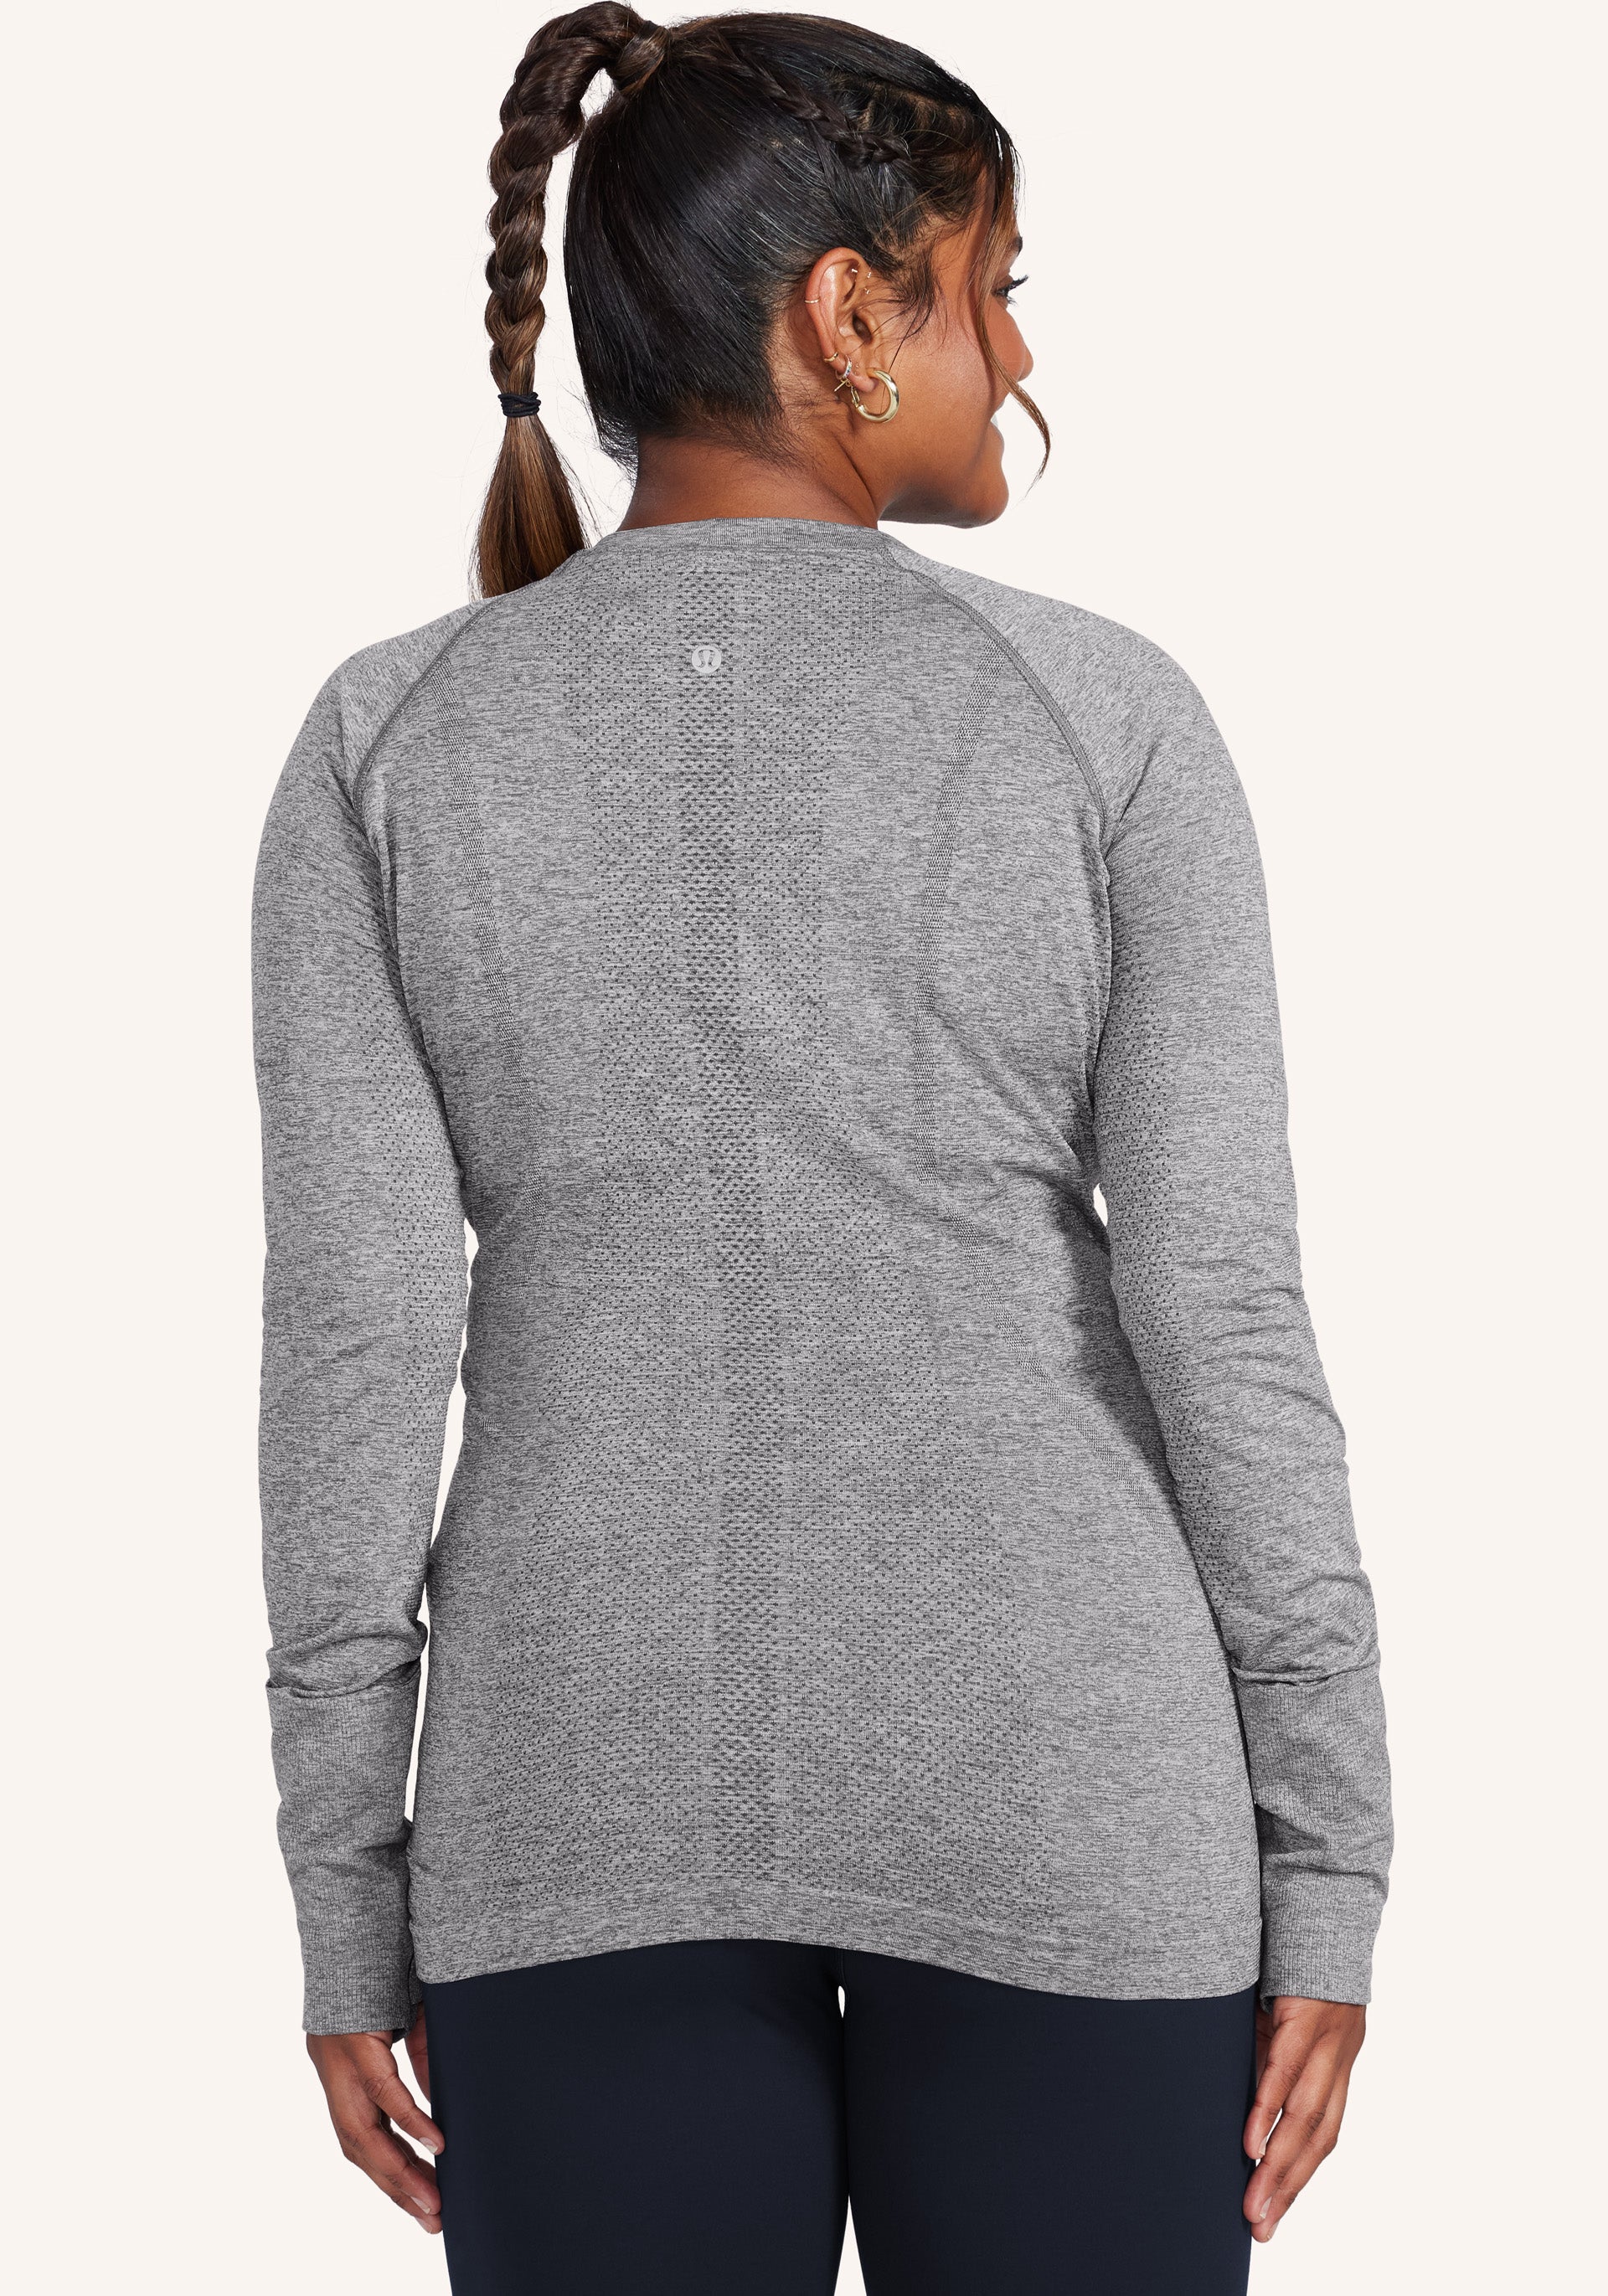 Lululemon Long Sleeve Shirt Size 10 - $40 (41% Off Retail) - From makinley